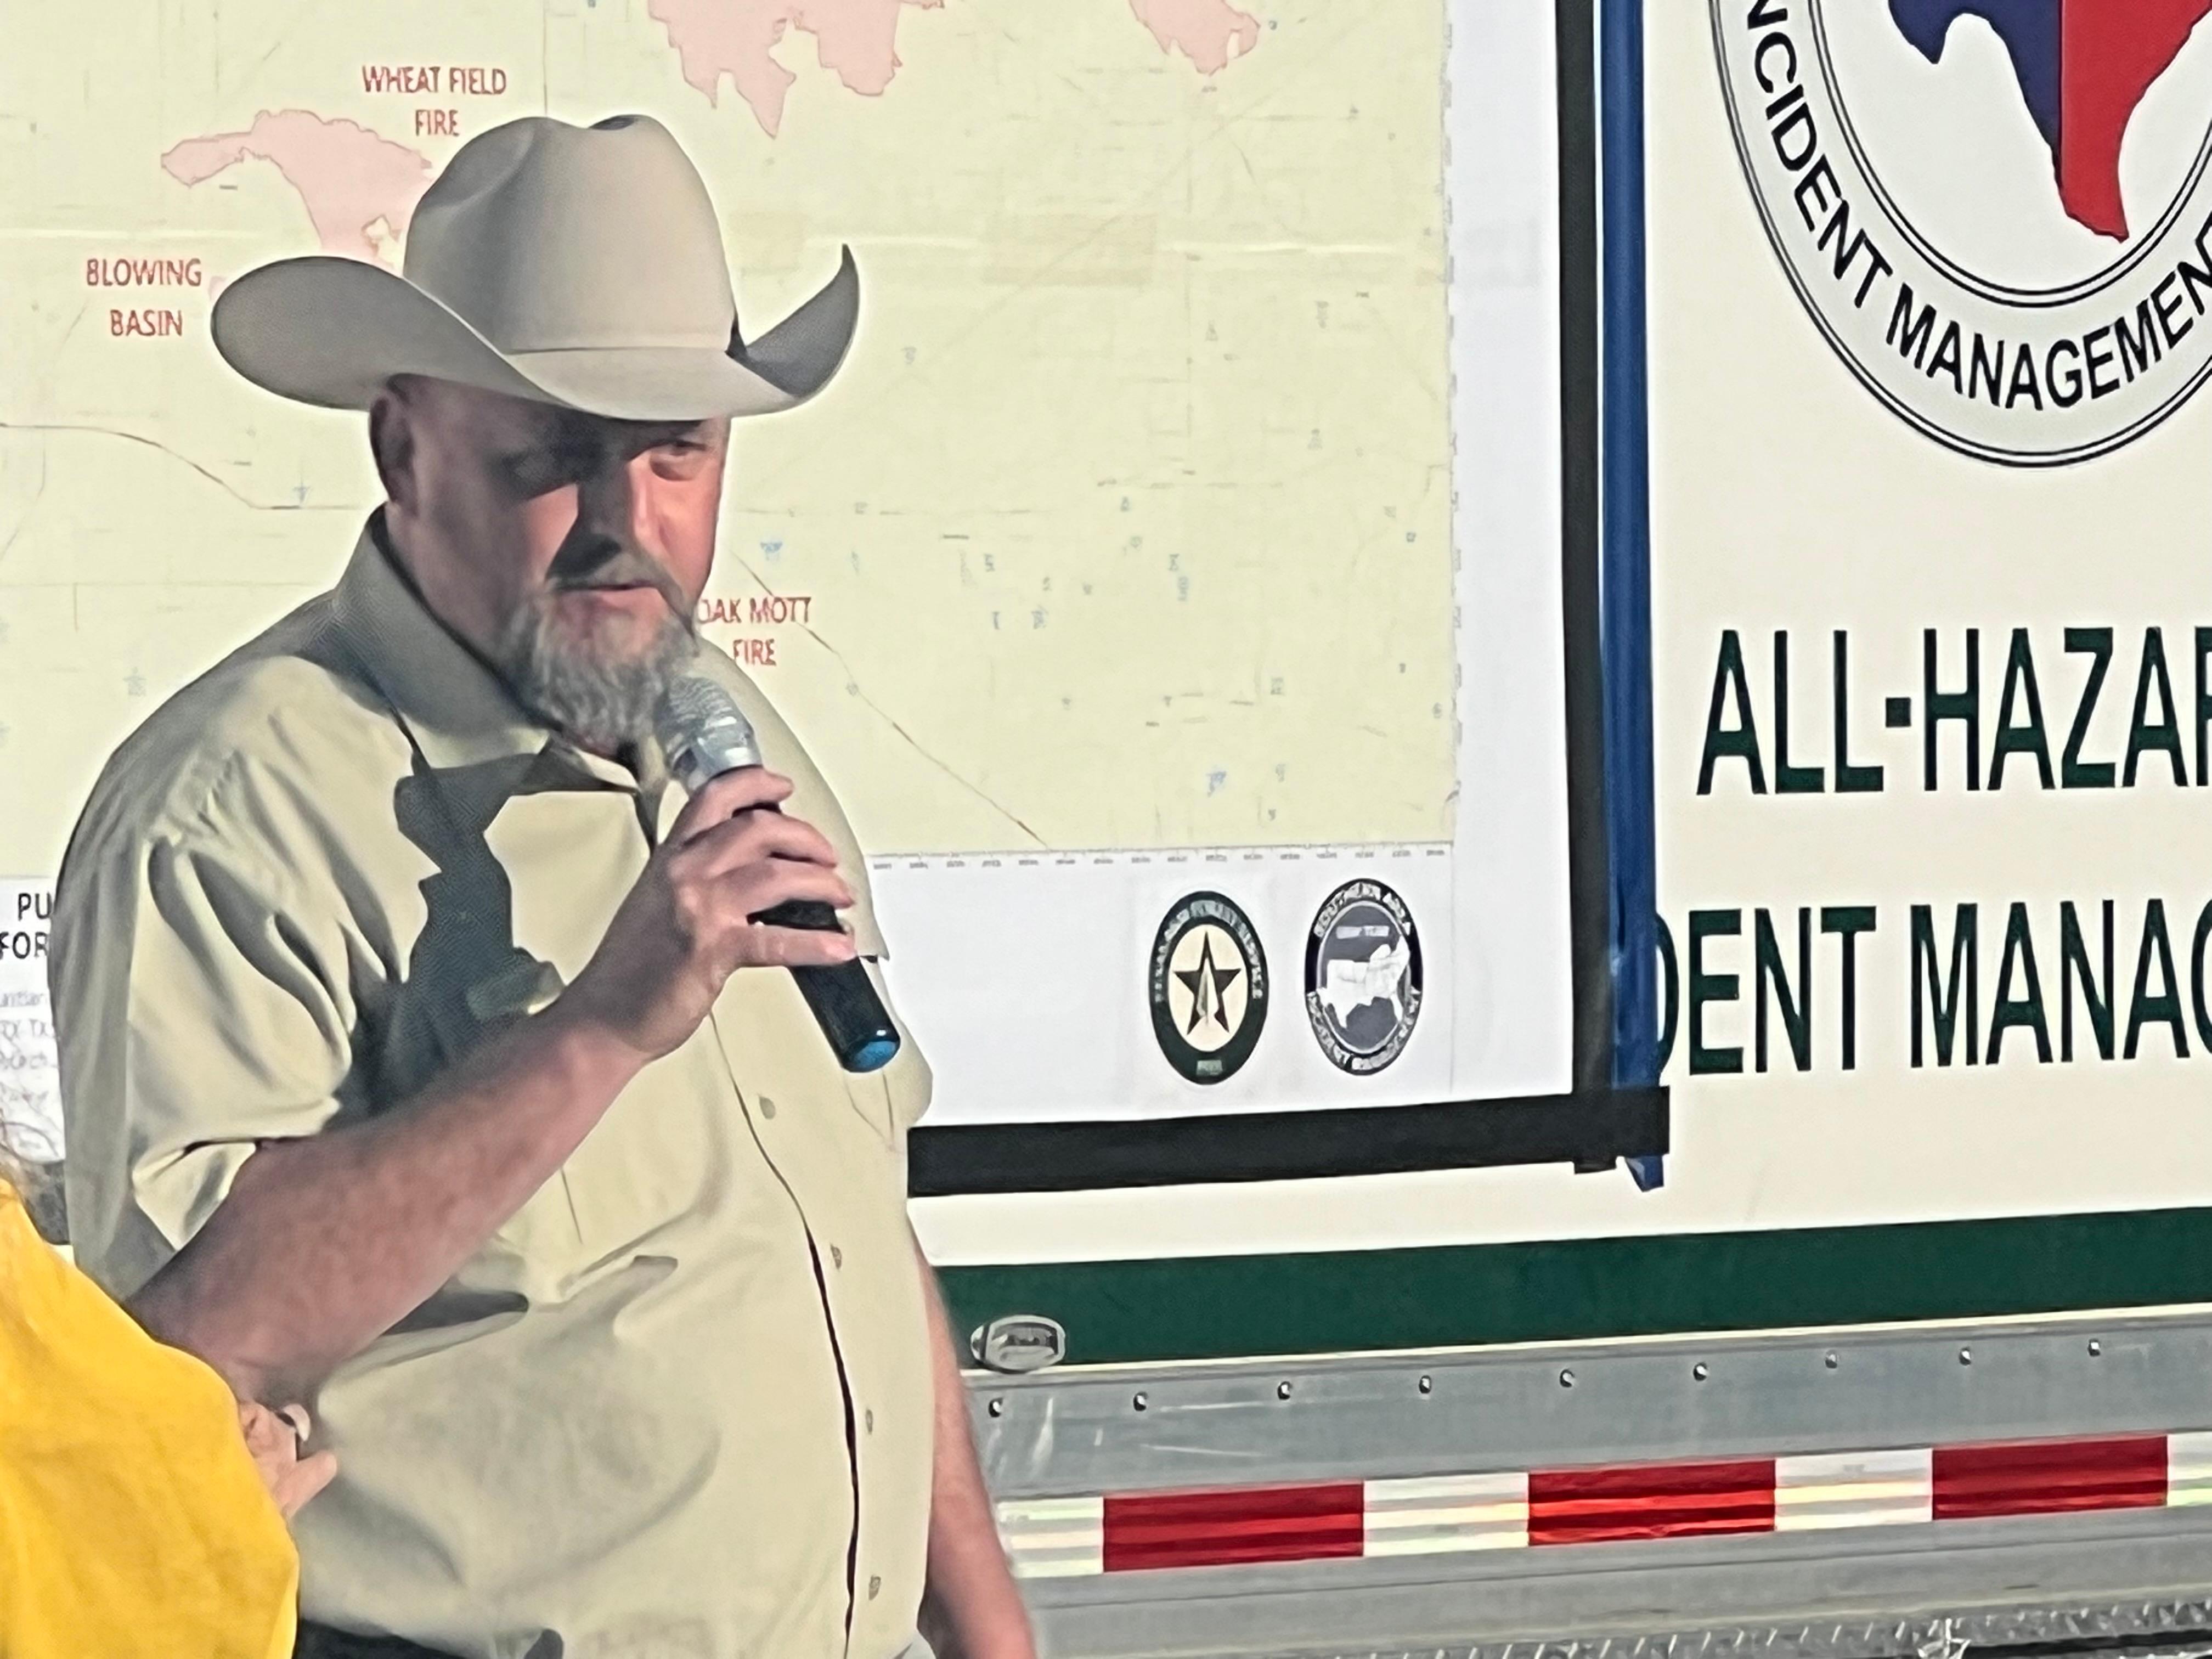 In this picture there is a gentleman wearing a Texas A&M Forest Service uniform and a cowboy hat, speaking to the attendees at the community meeting